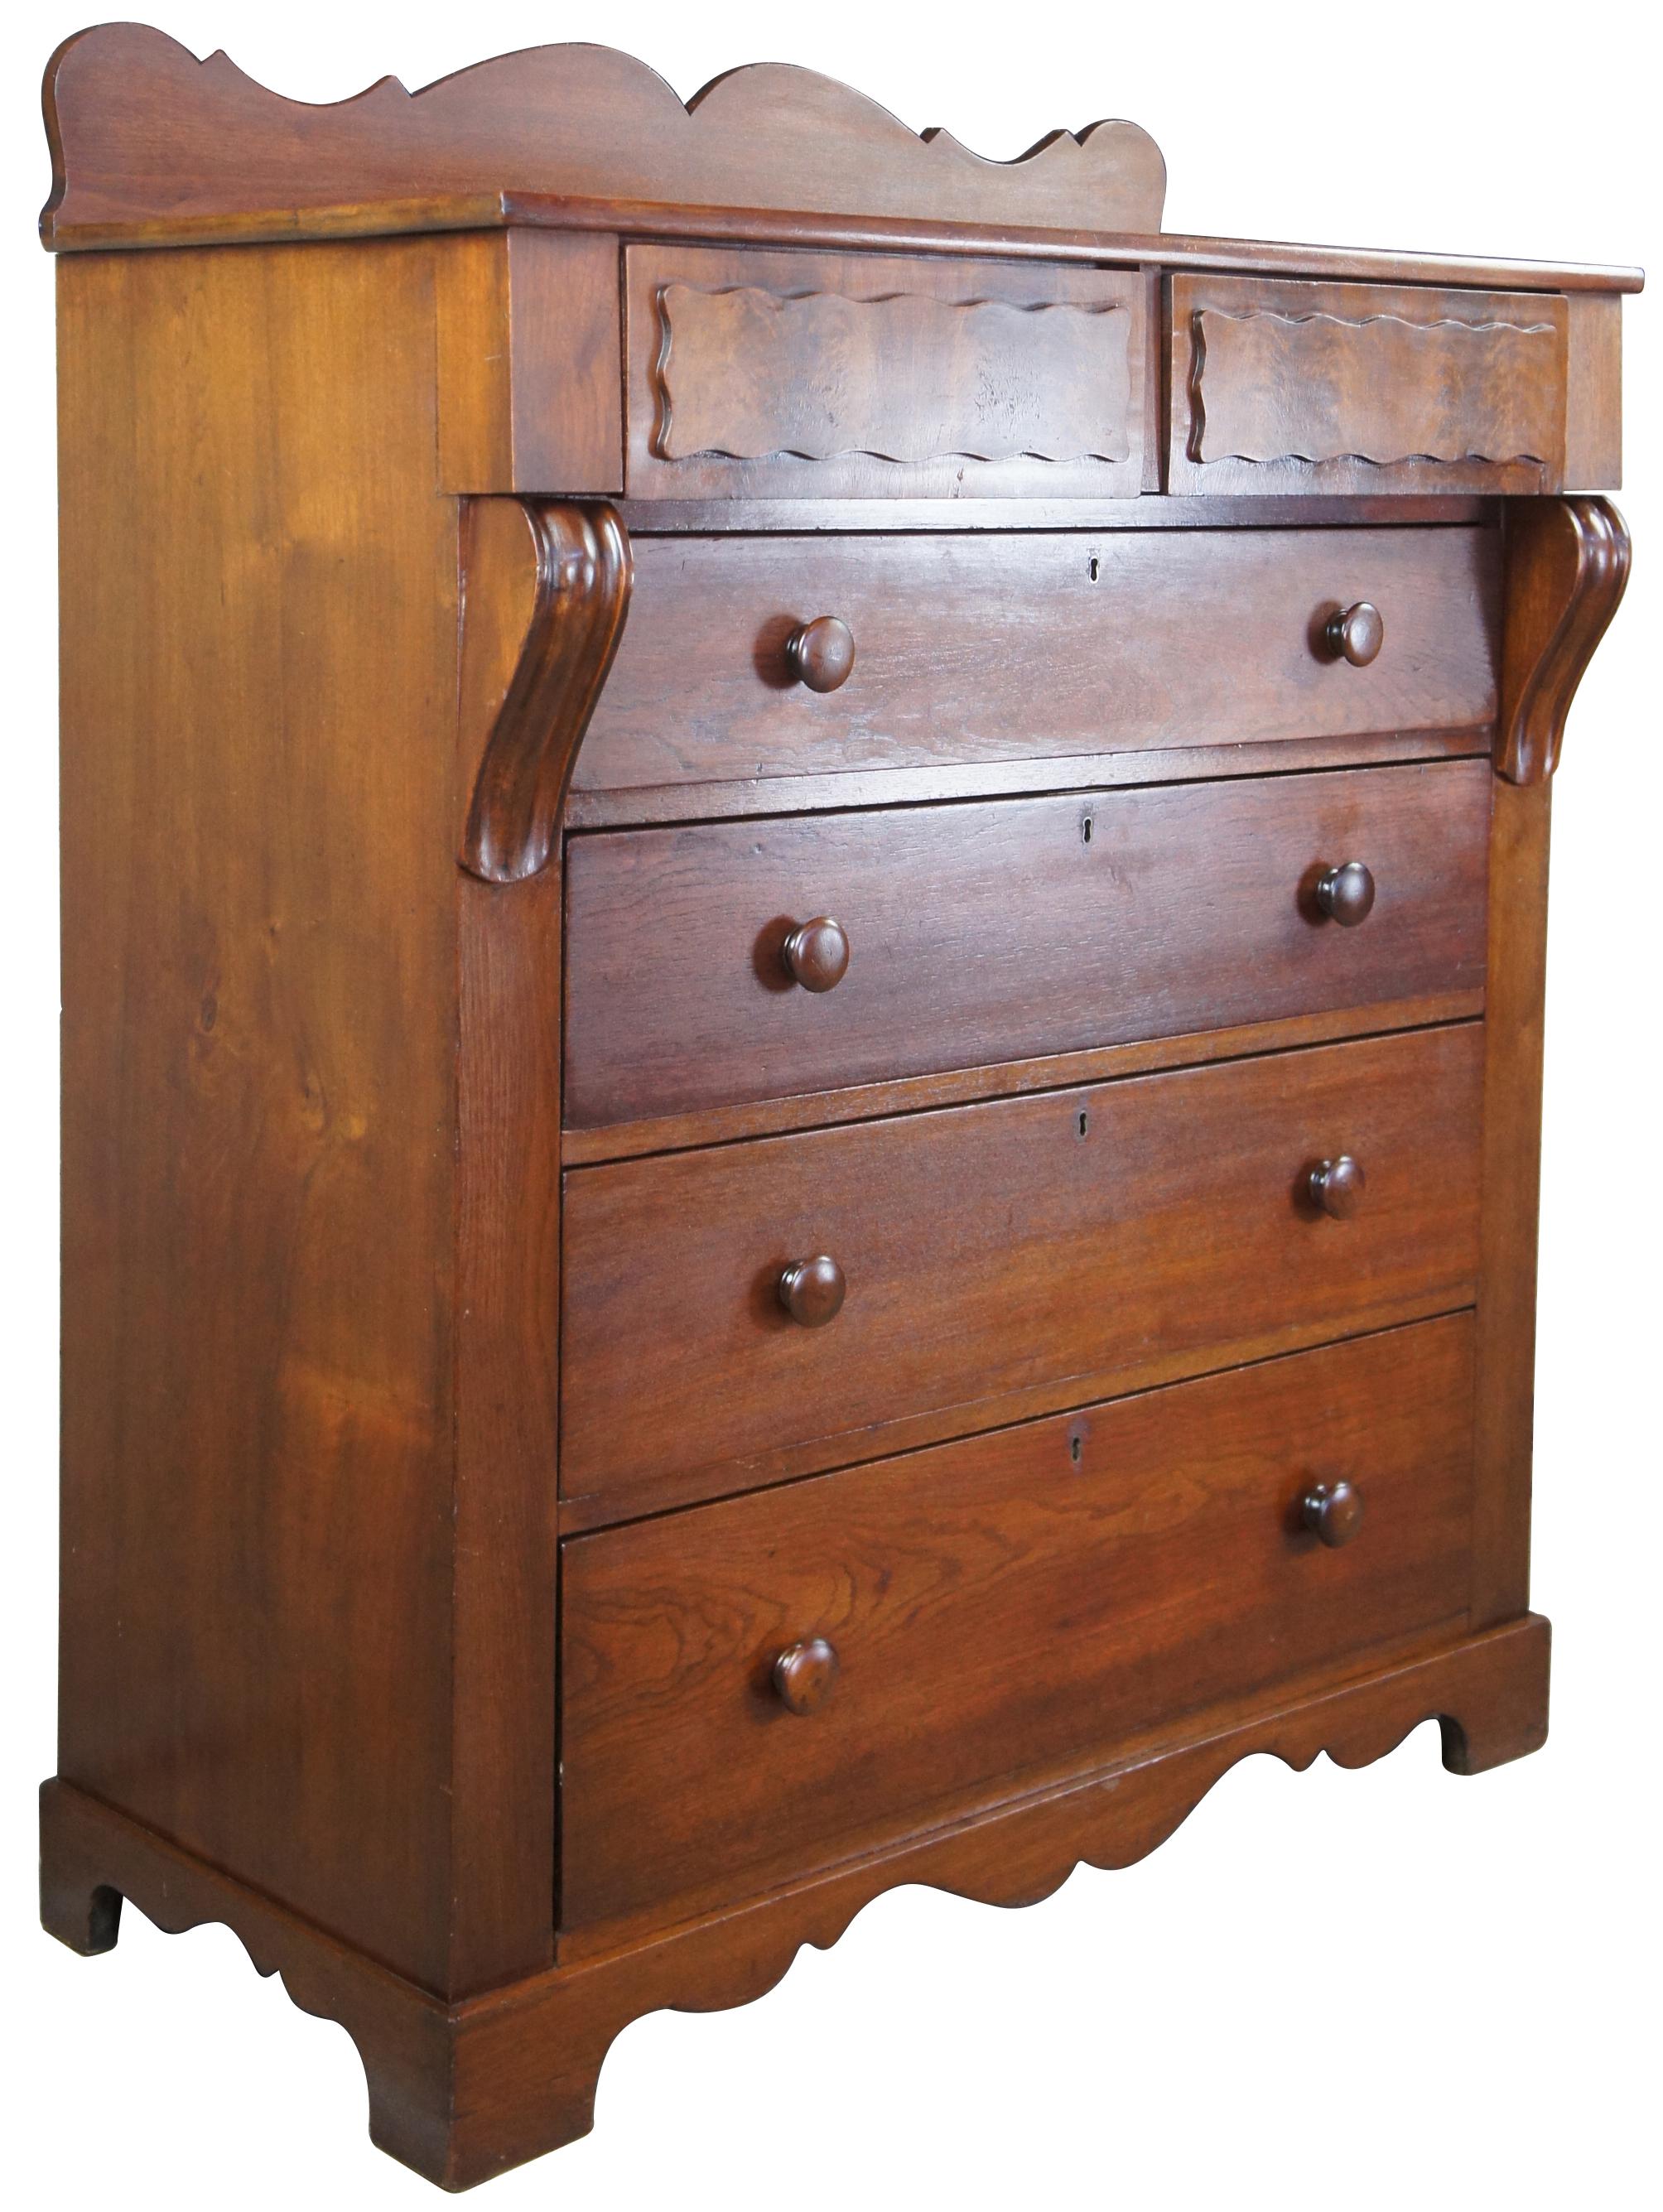 Antique 19th century American Empire tallboy dresser or gentleman's chest. Made of mahogany with serpentine backsplash, raised flame mahogany upper drawer panels supported by corbel embellishments over four drawers. 

Surface height - 47